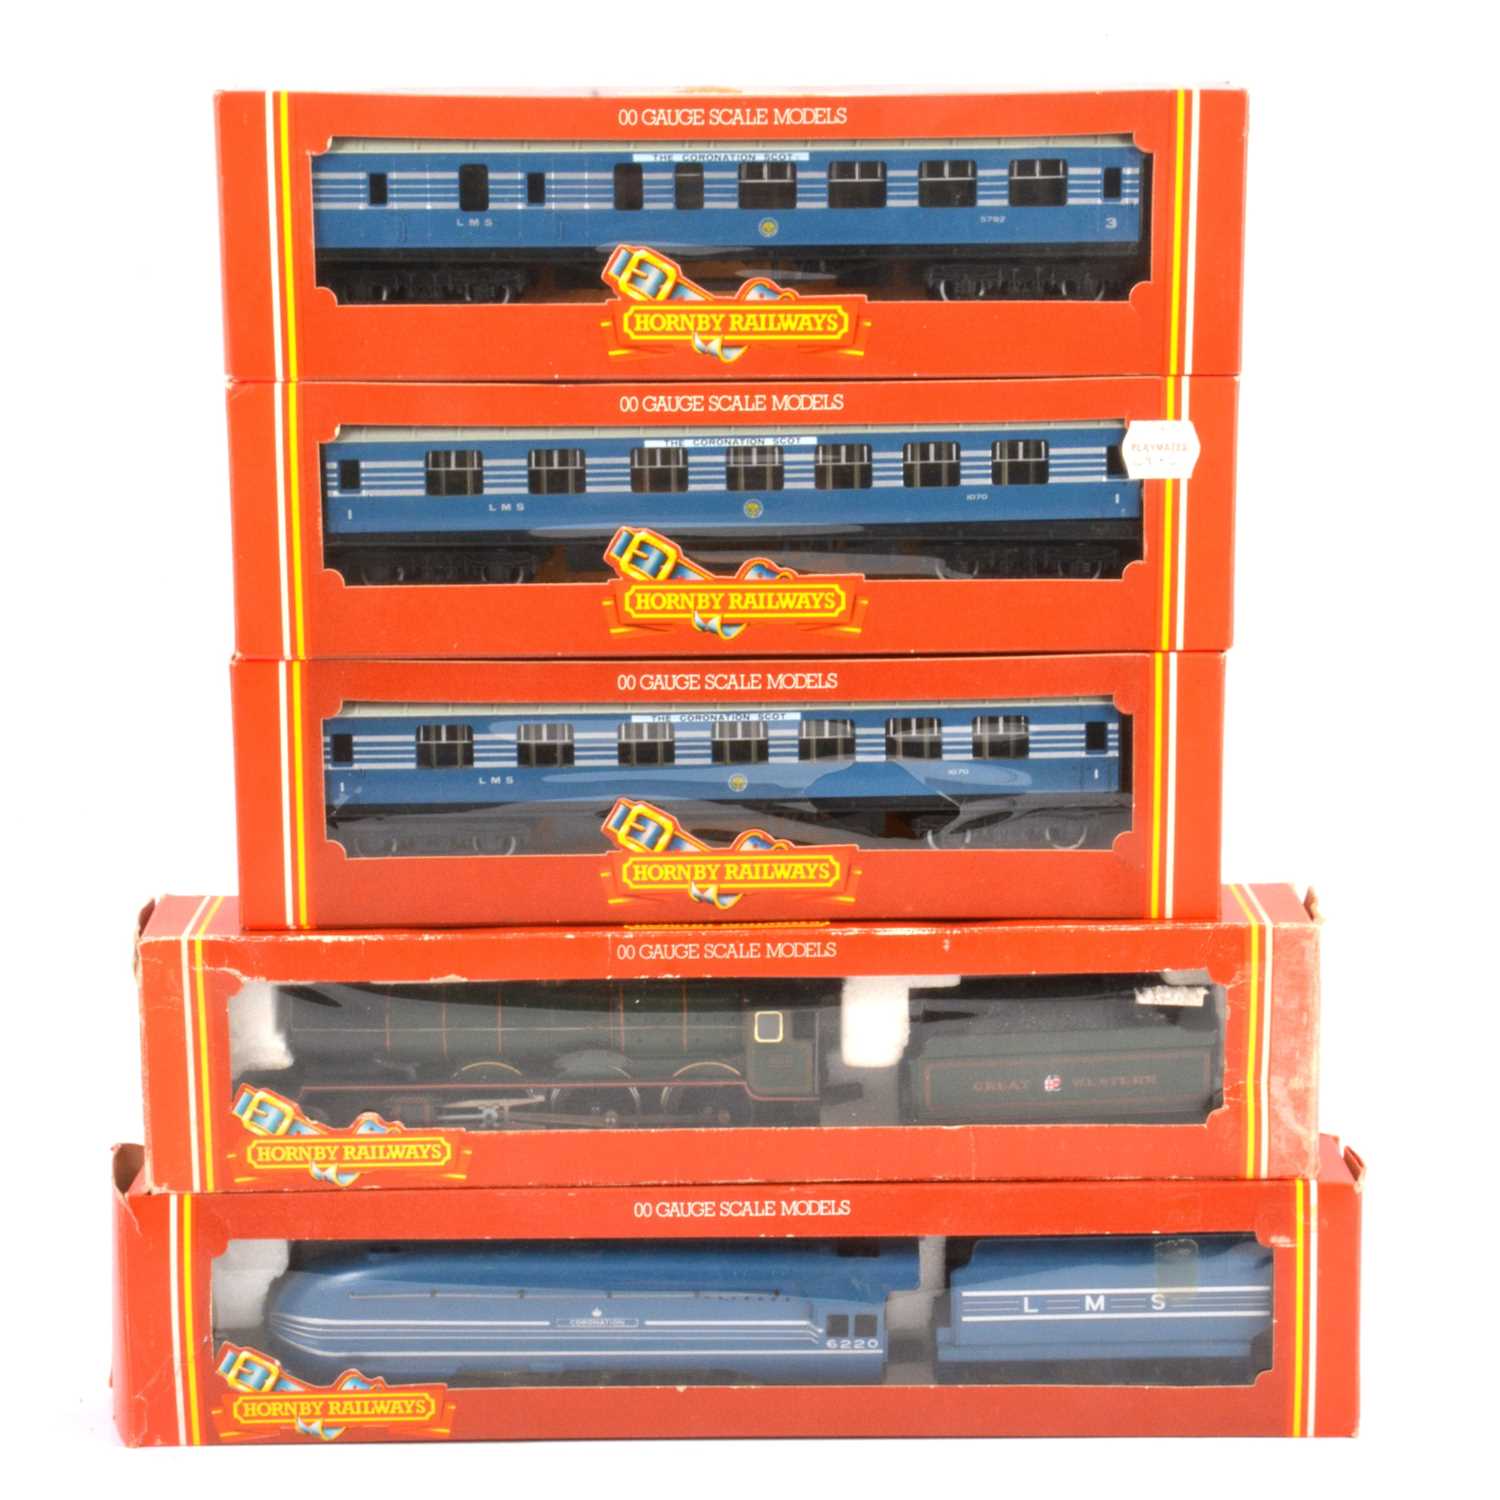 Lot 59 - Hornby OO gauge model railways, two locomotives and three passenger coaches.